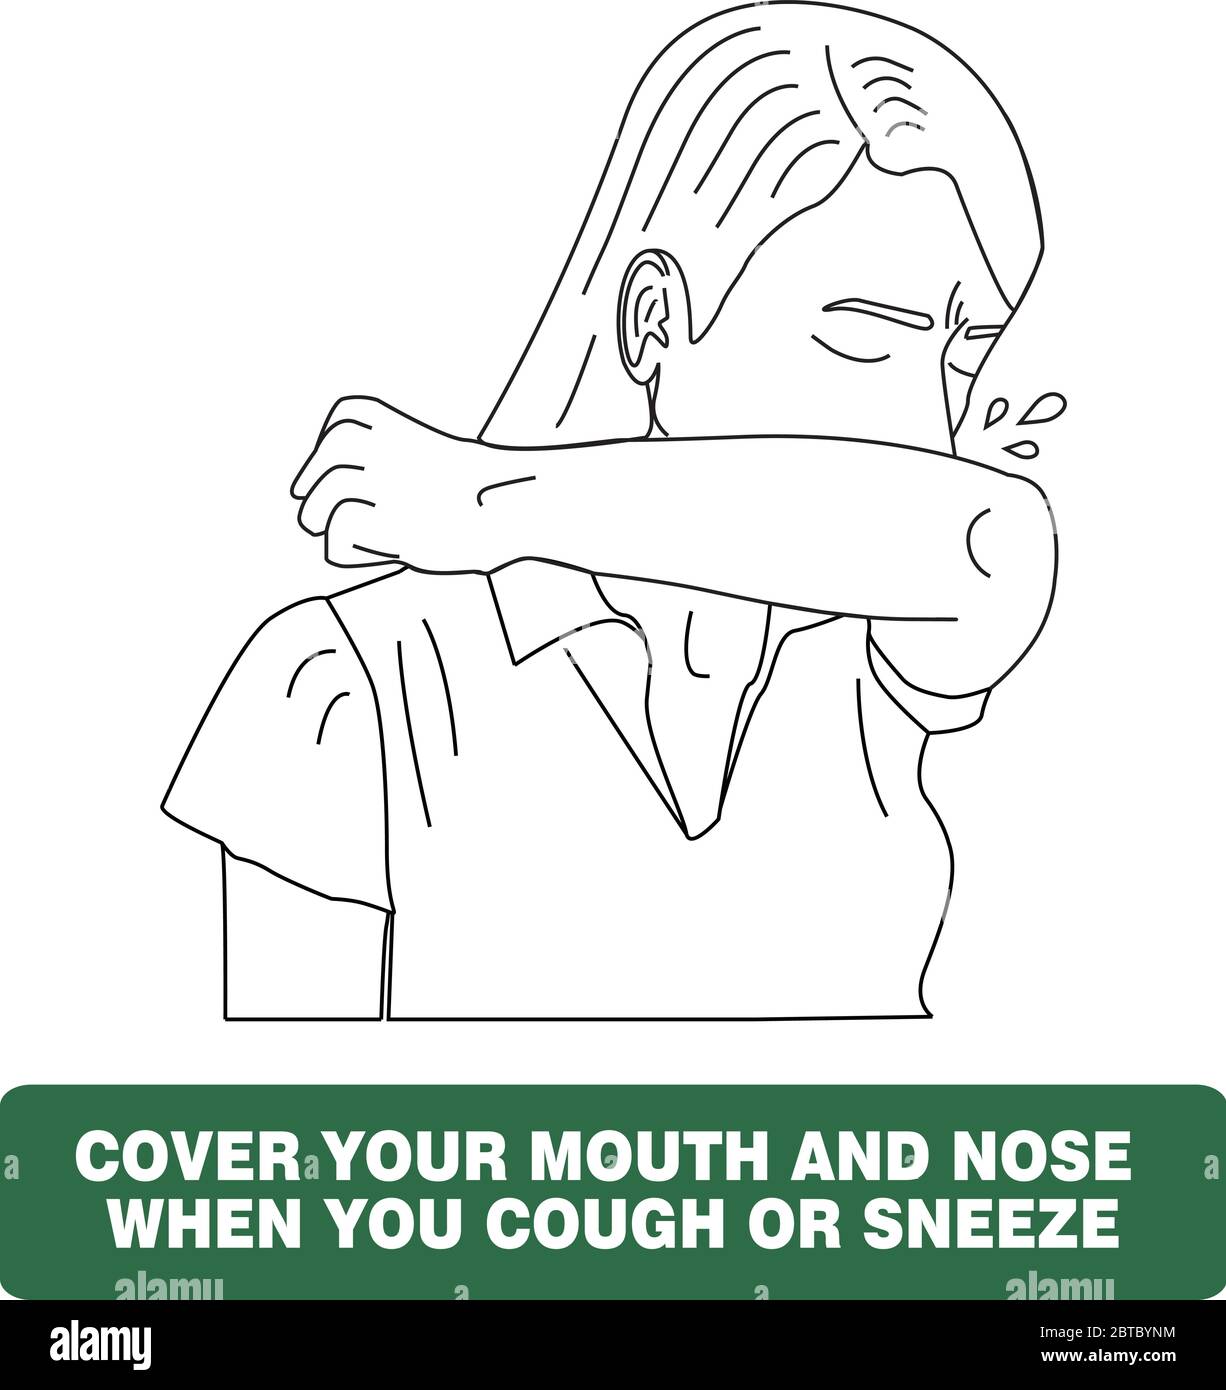 Cover your mouth and nose with arm when cough or sneeze. woman vector warning sign about cough and sneeze. Coronavirus protection sign. Stock Vector